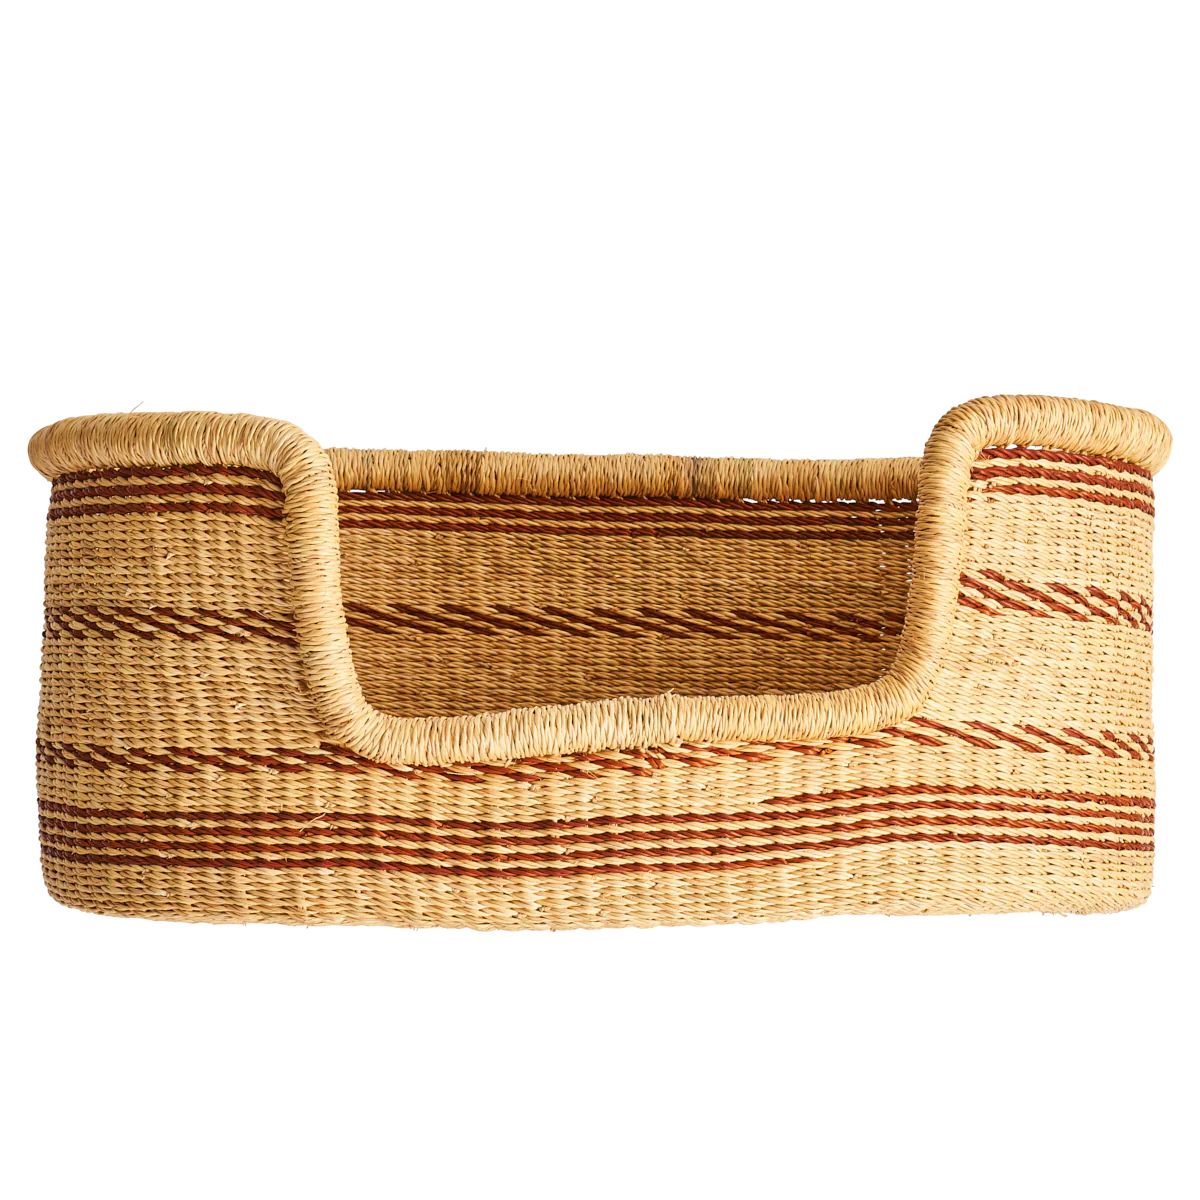 Gurunsi Dog Bed in Russet | Over The Moon Gift